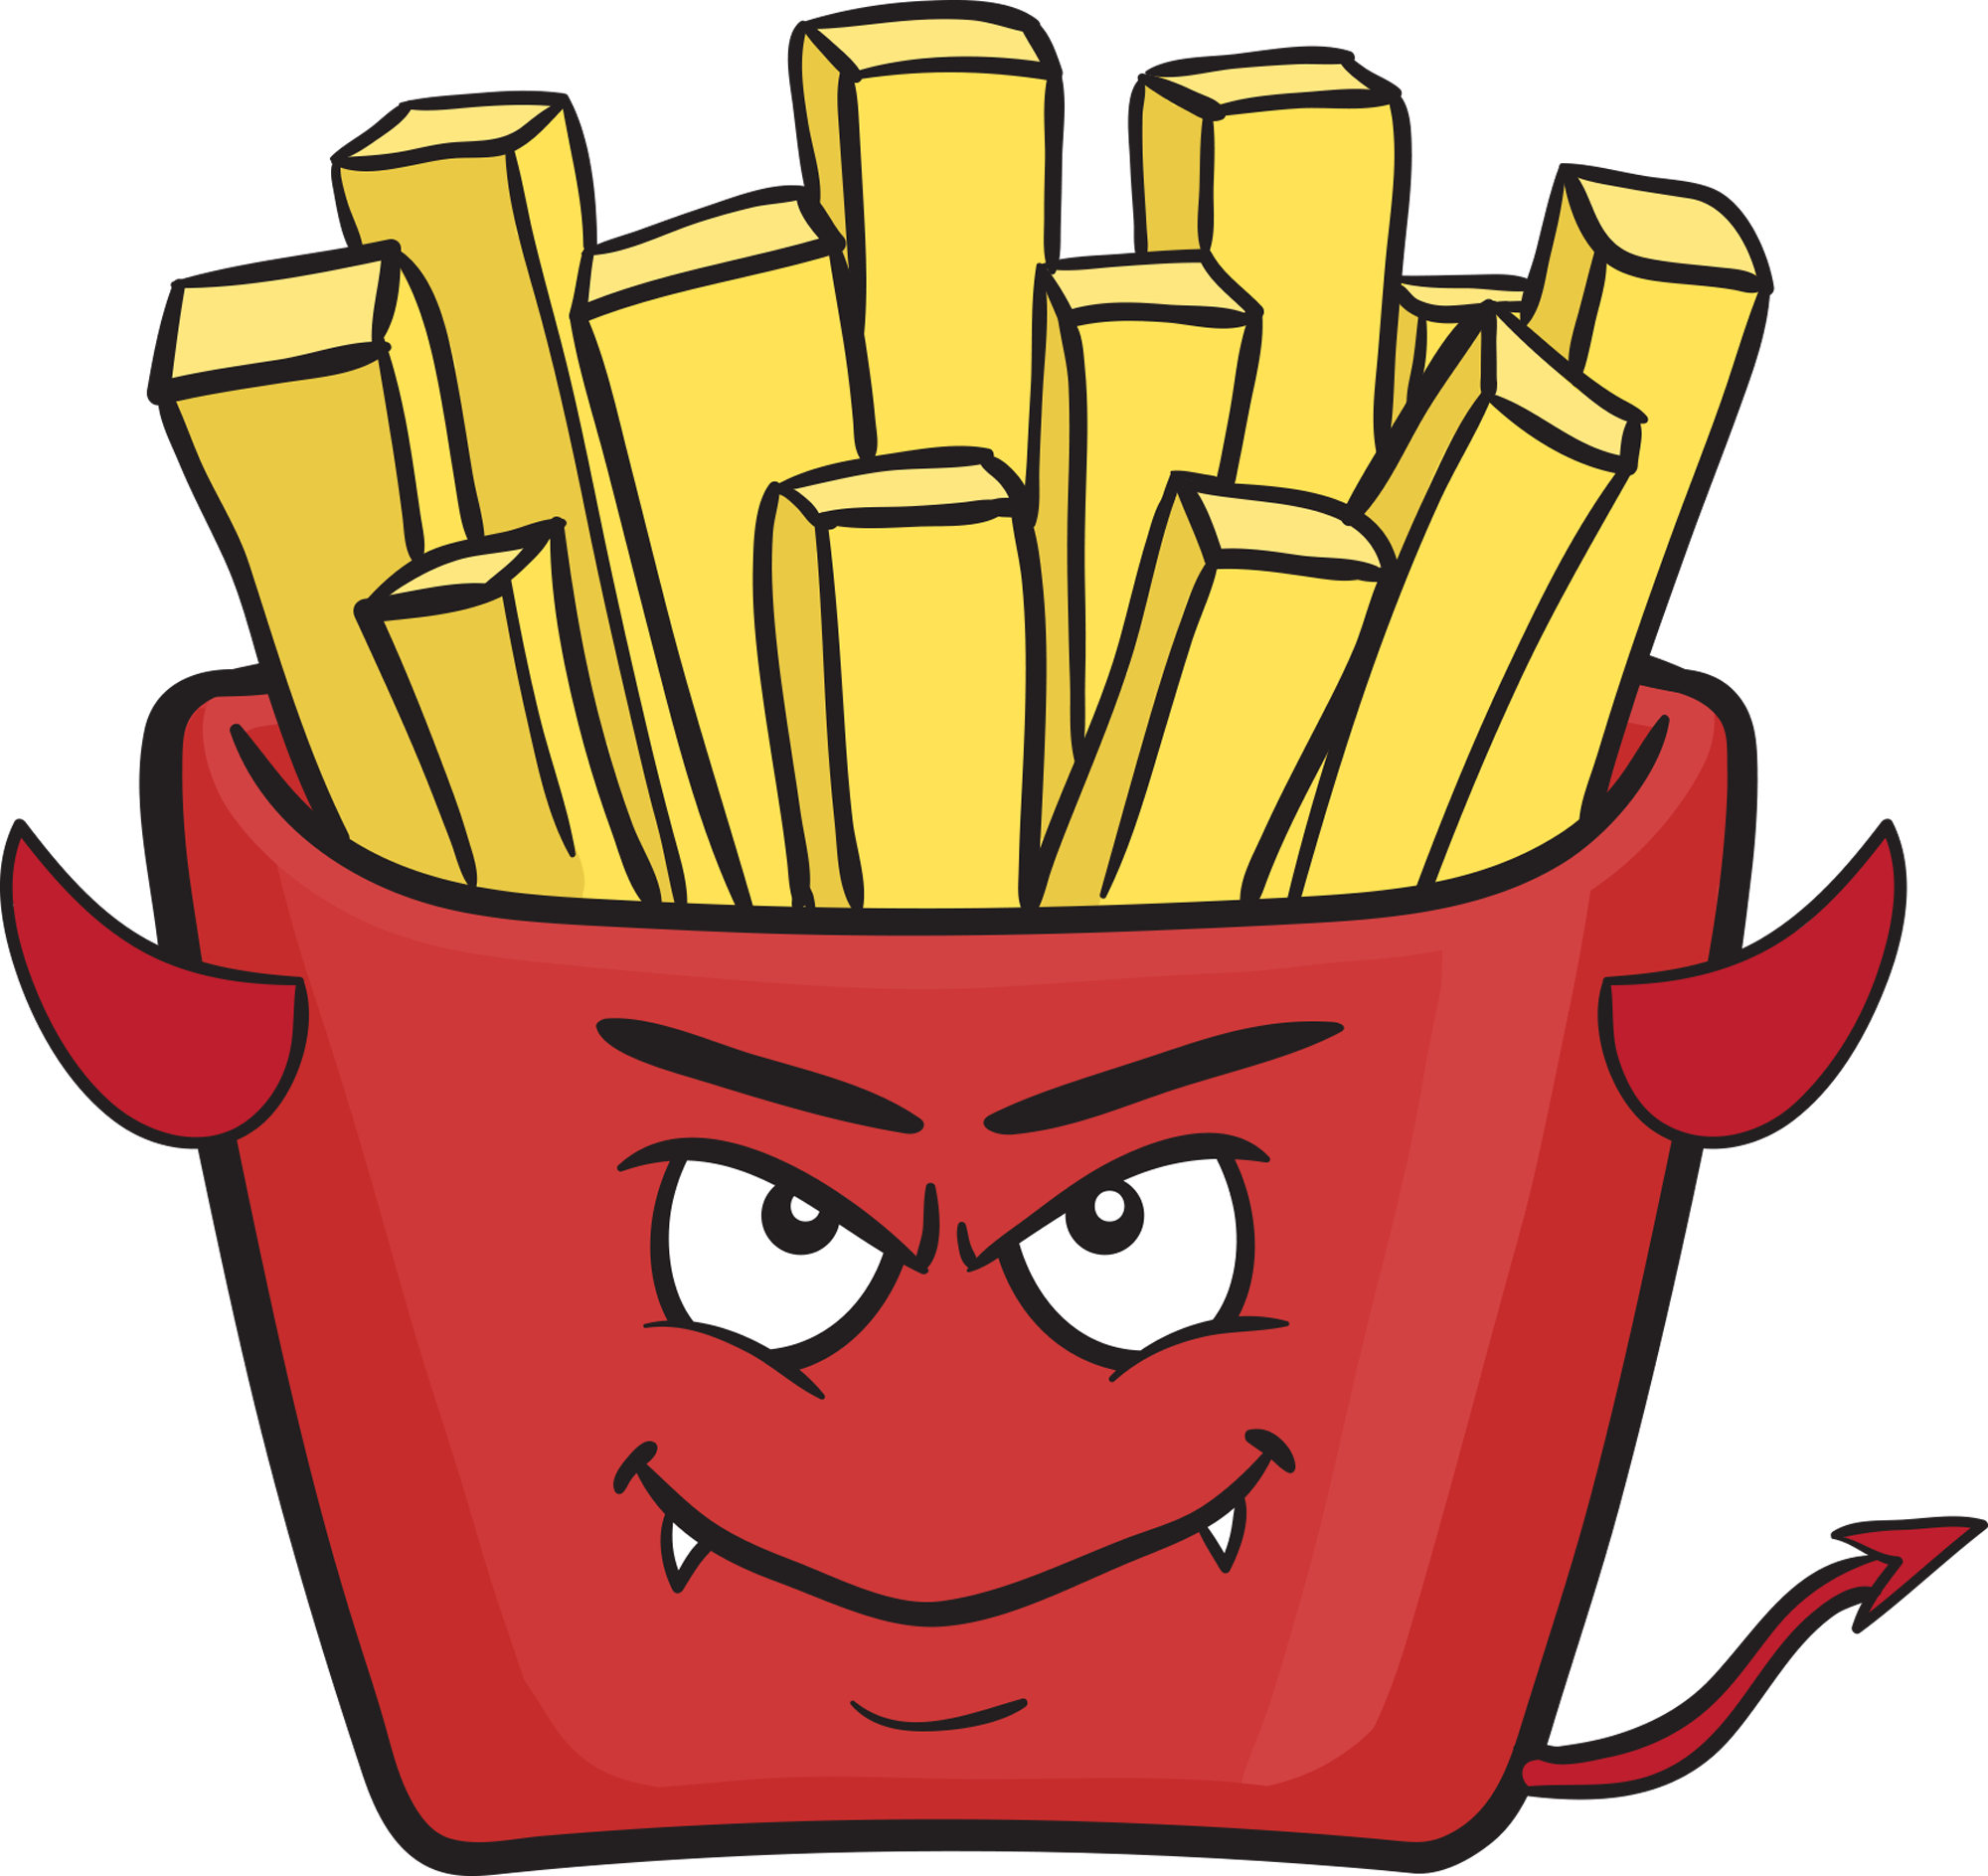 Evil French Fries - French Fries Cartoon (2000x1887)